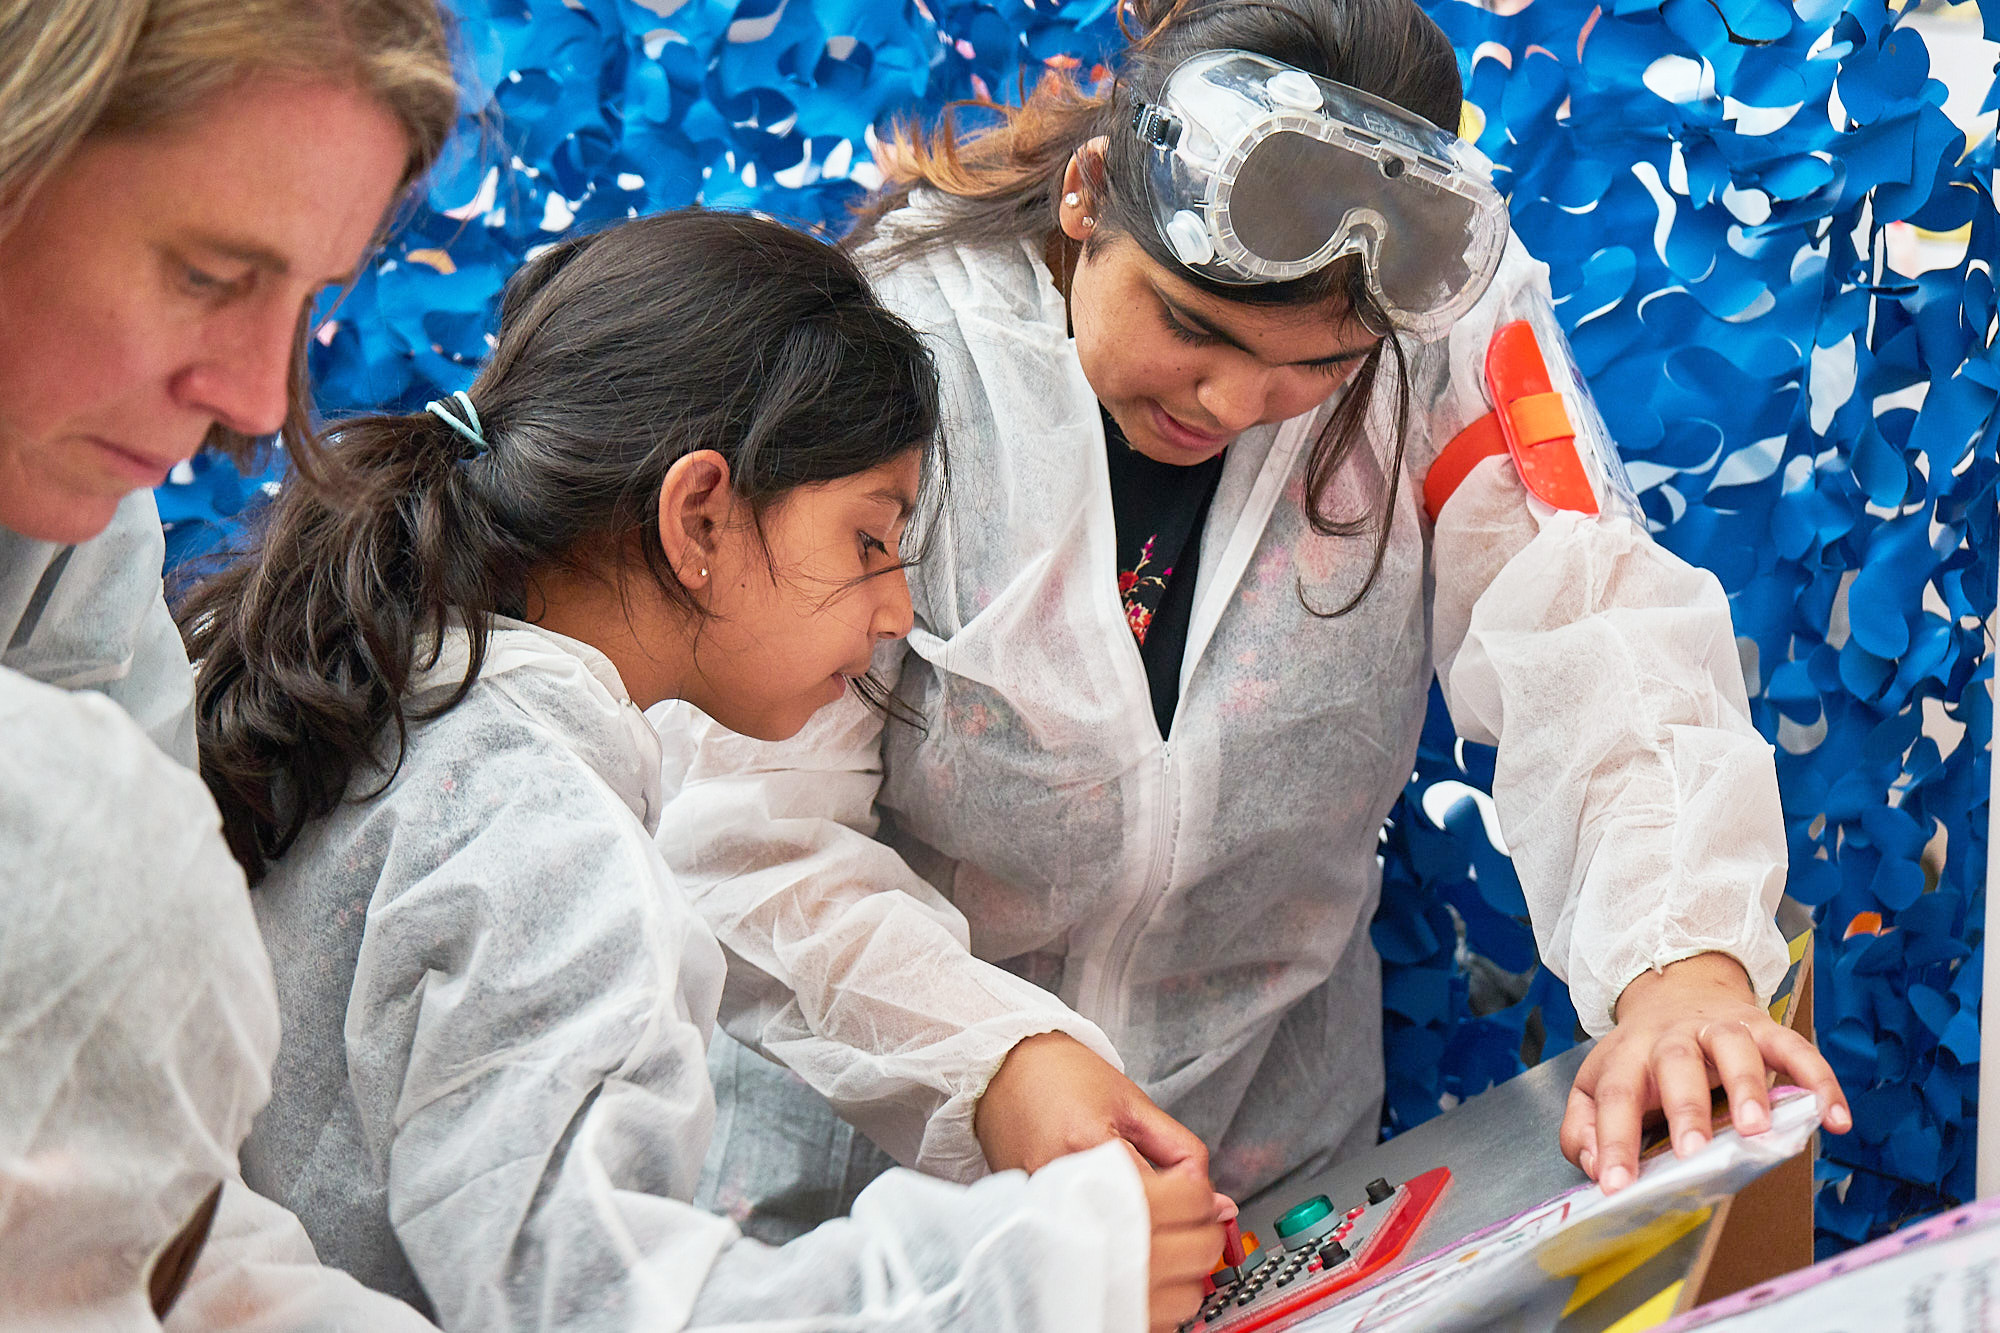 Children wearing white boiler suits participate in a science activity